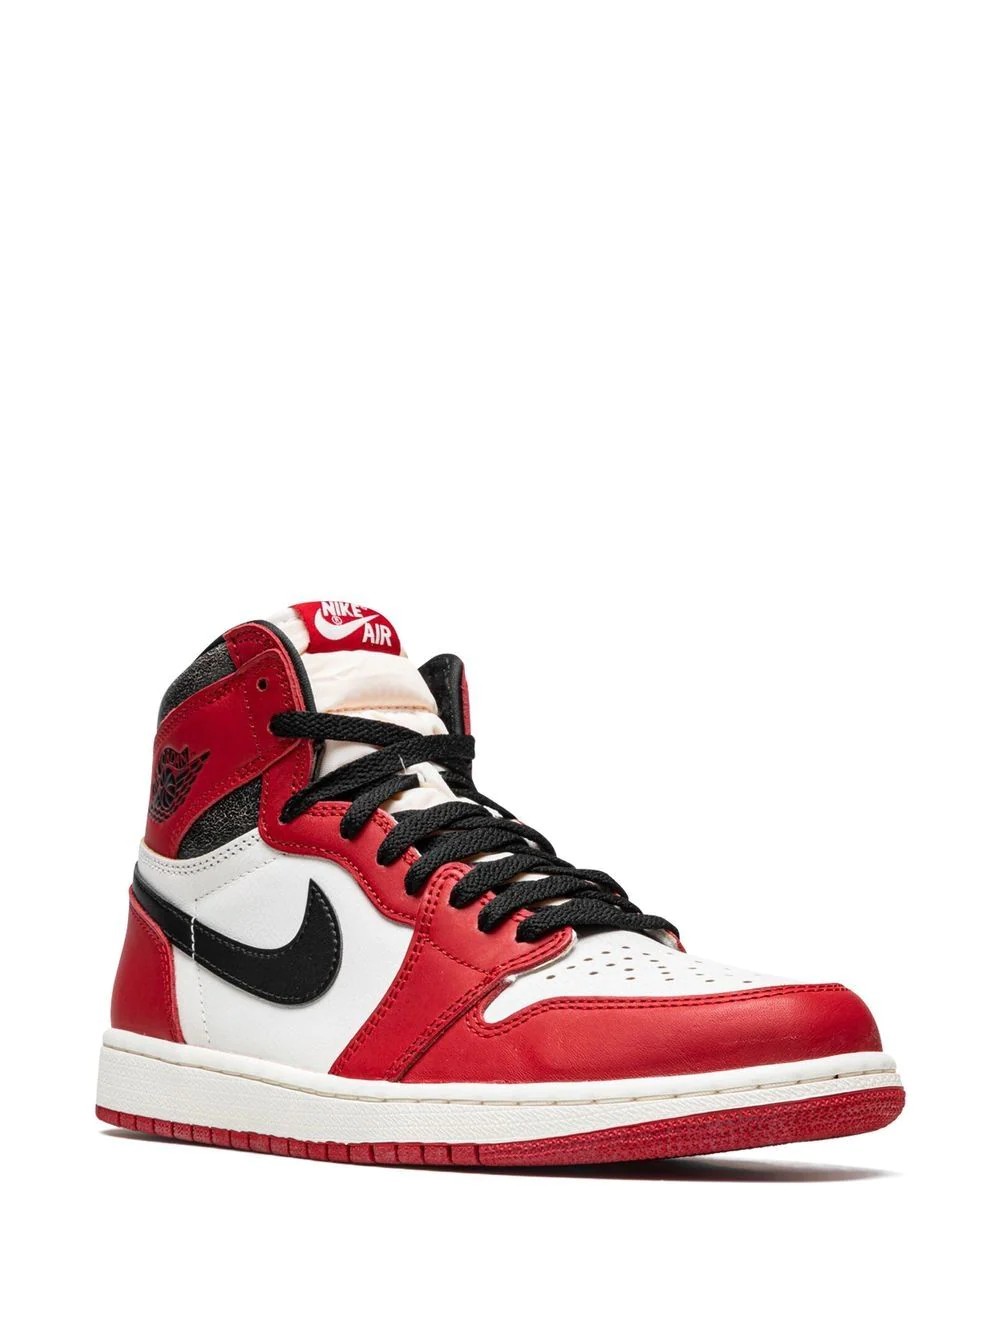 Air Jordan 1 Retro High OG Chicago Lost And Found 